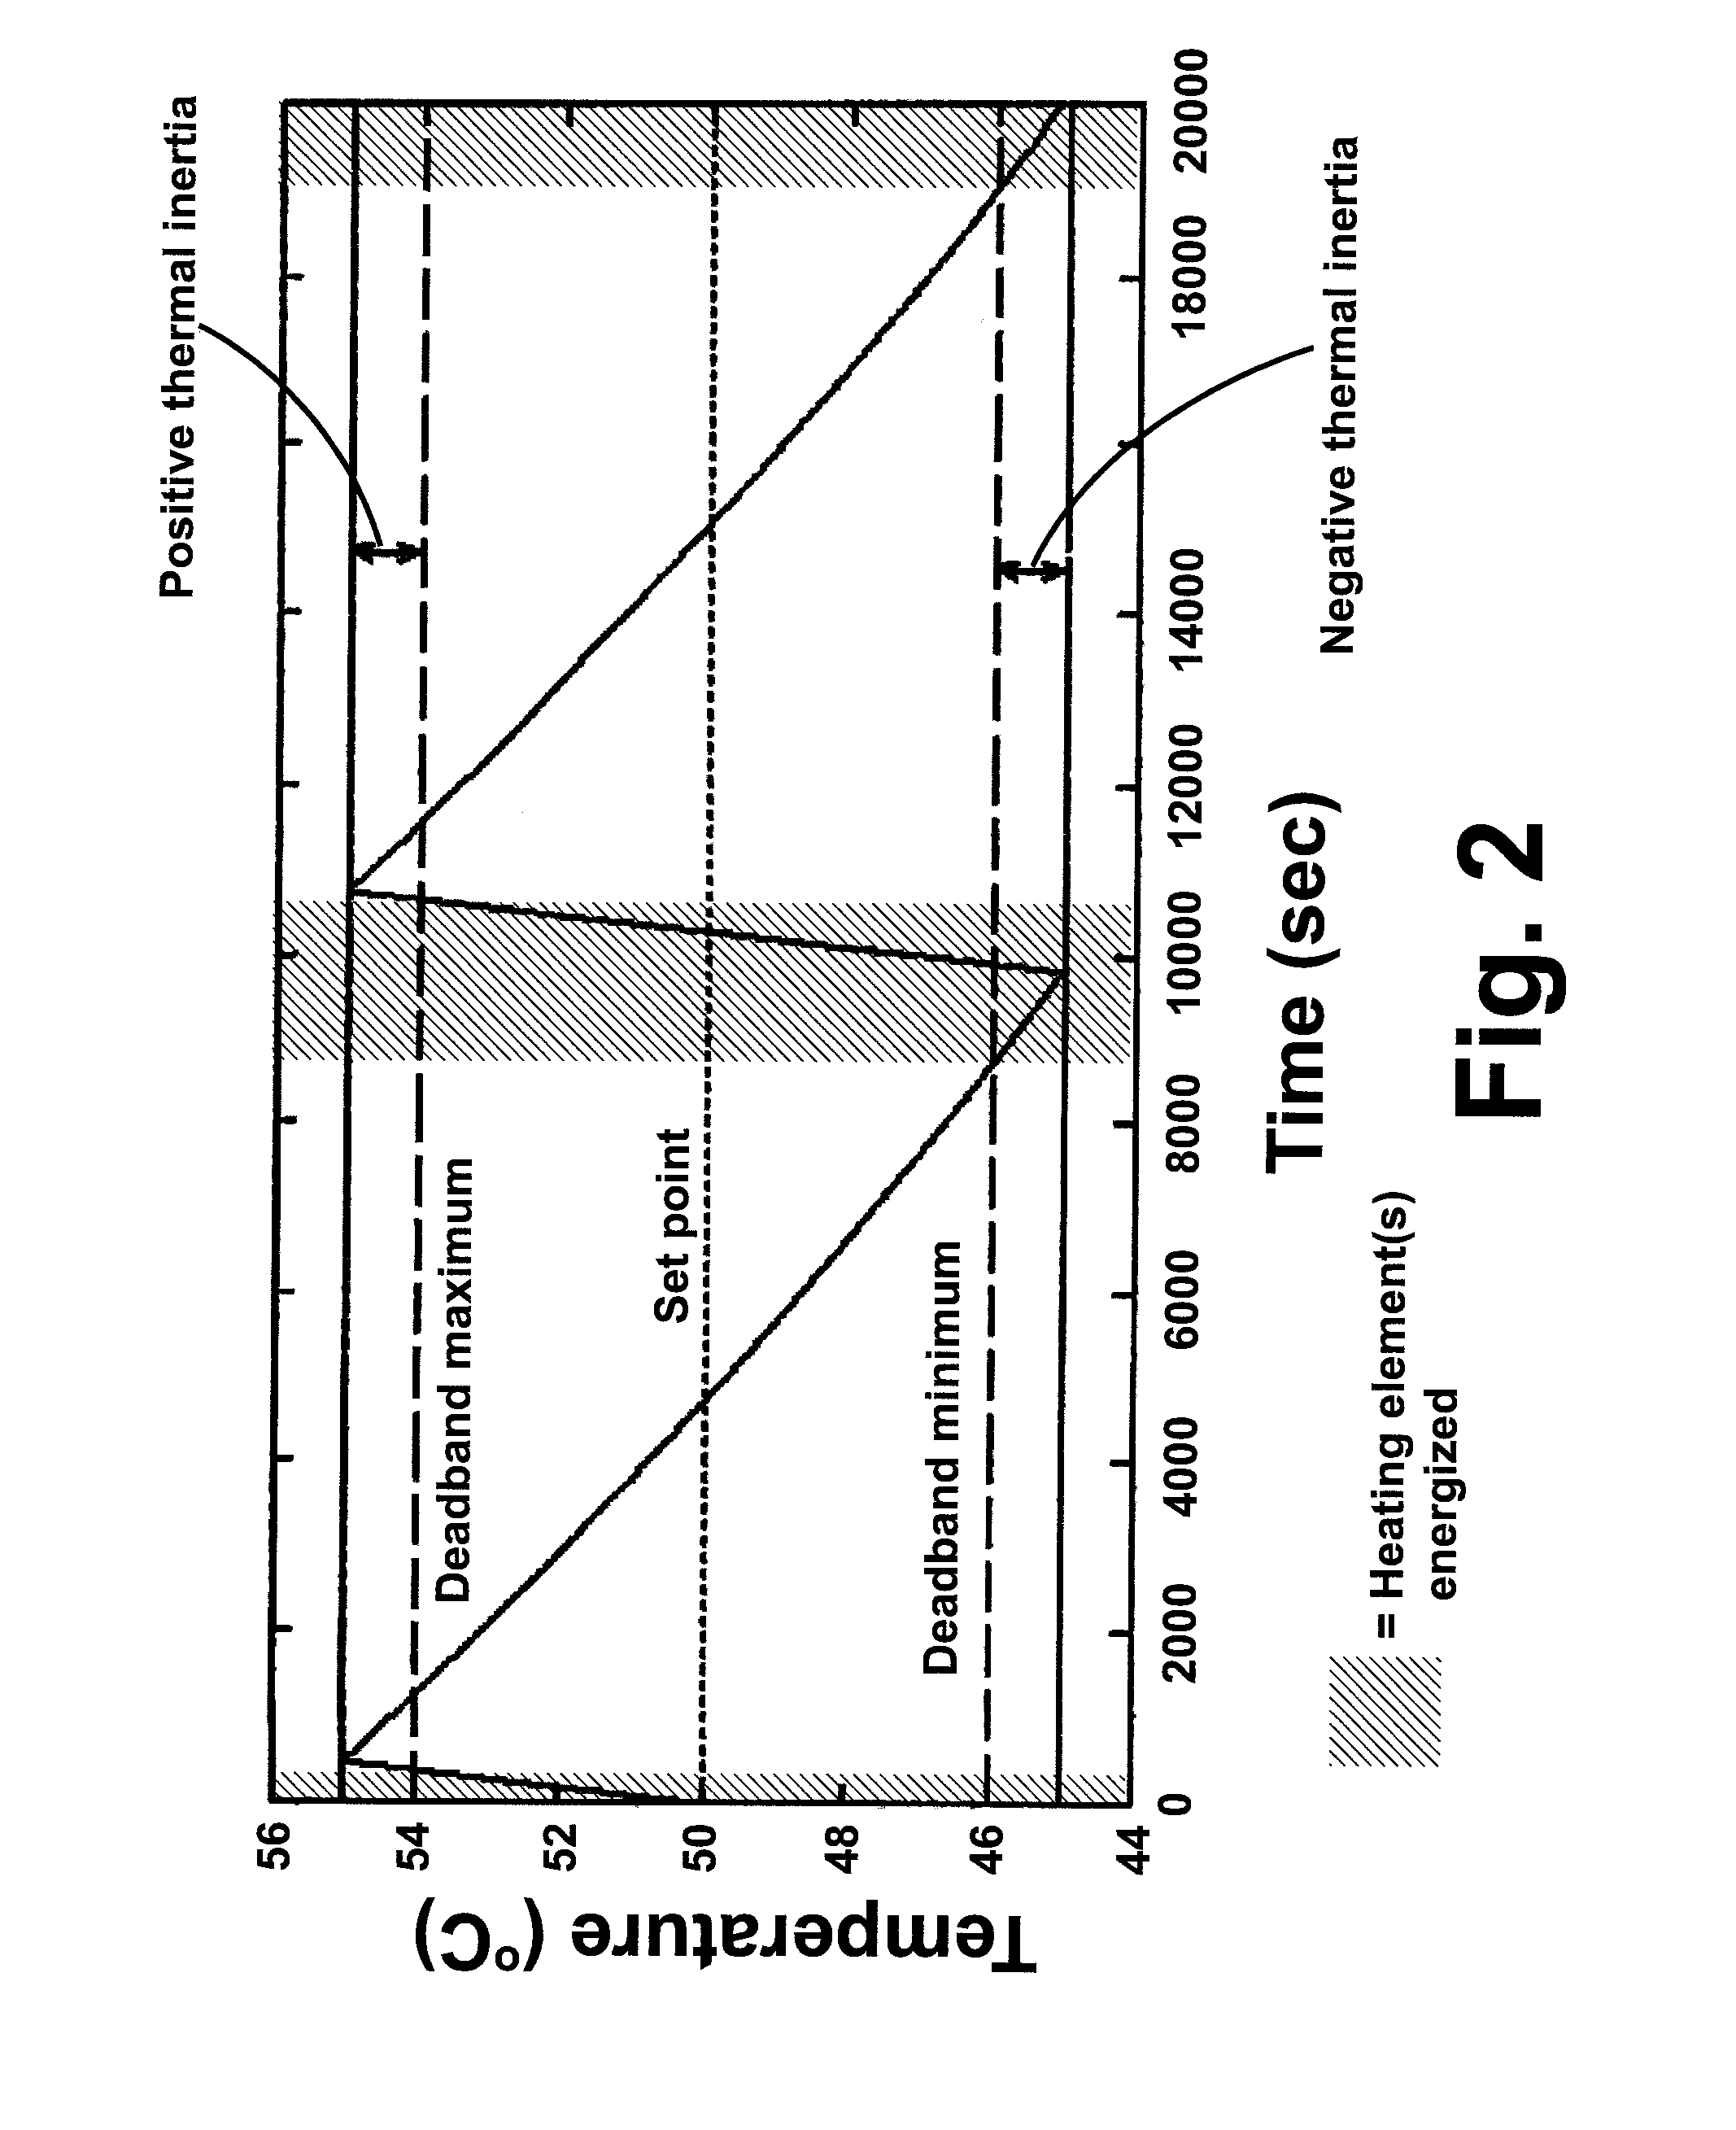 Automatic set point detection for water heaters operating in a demand response